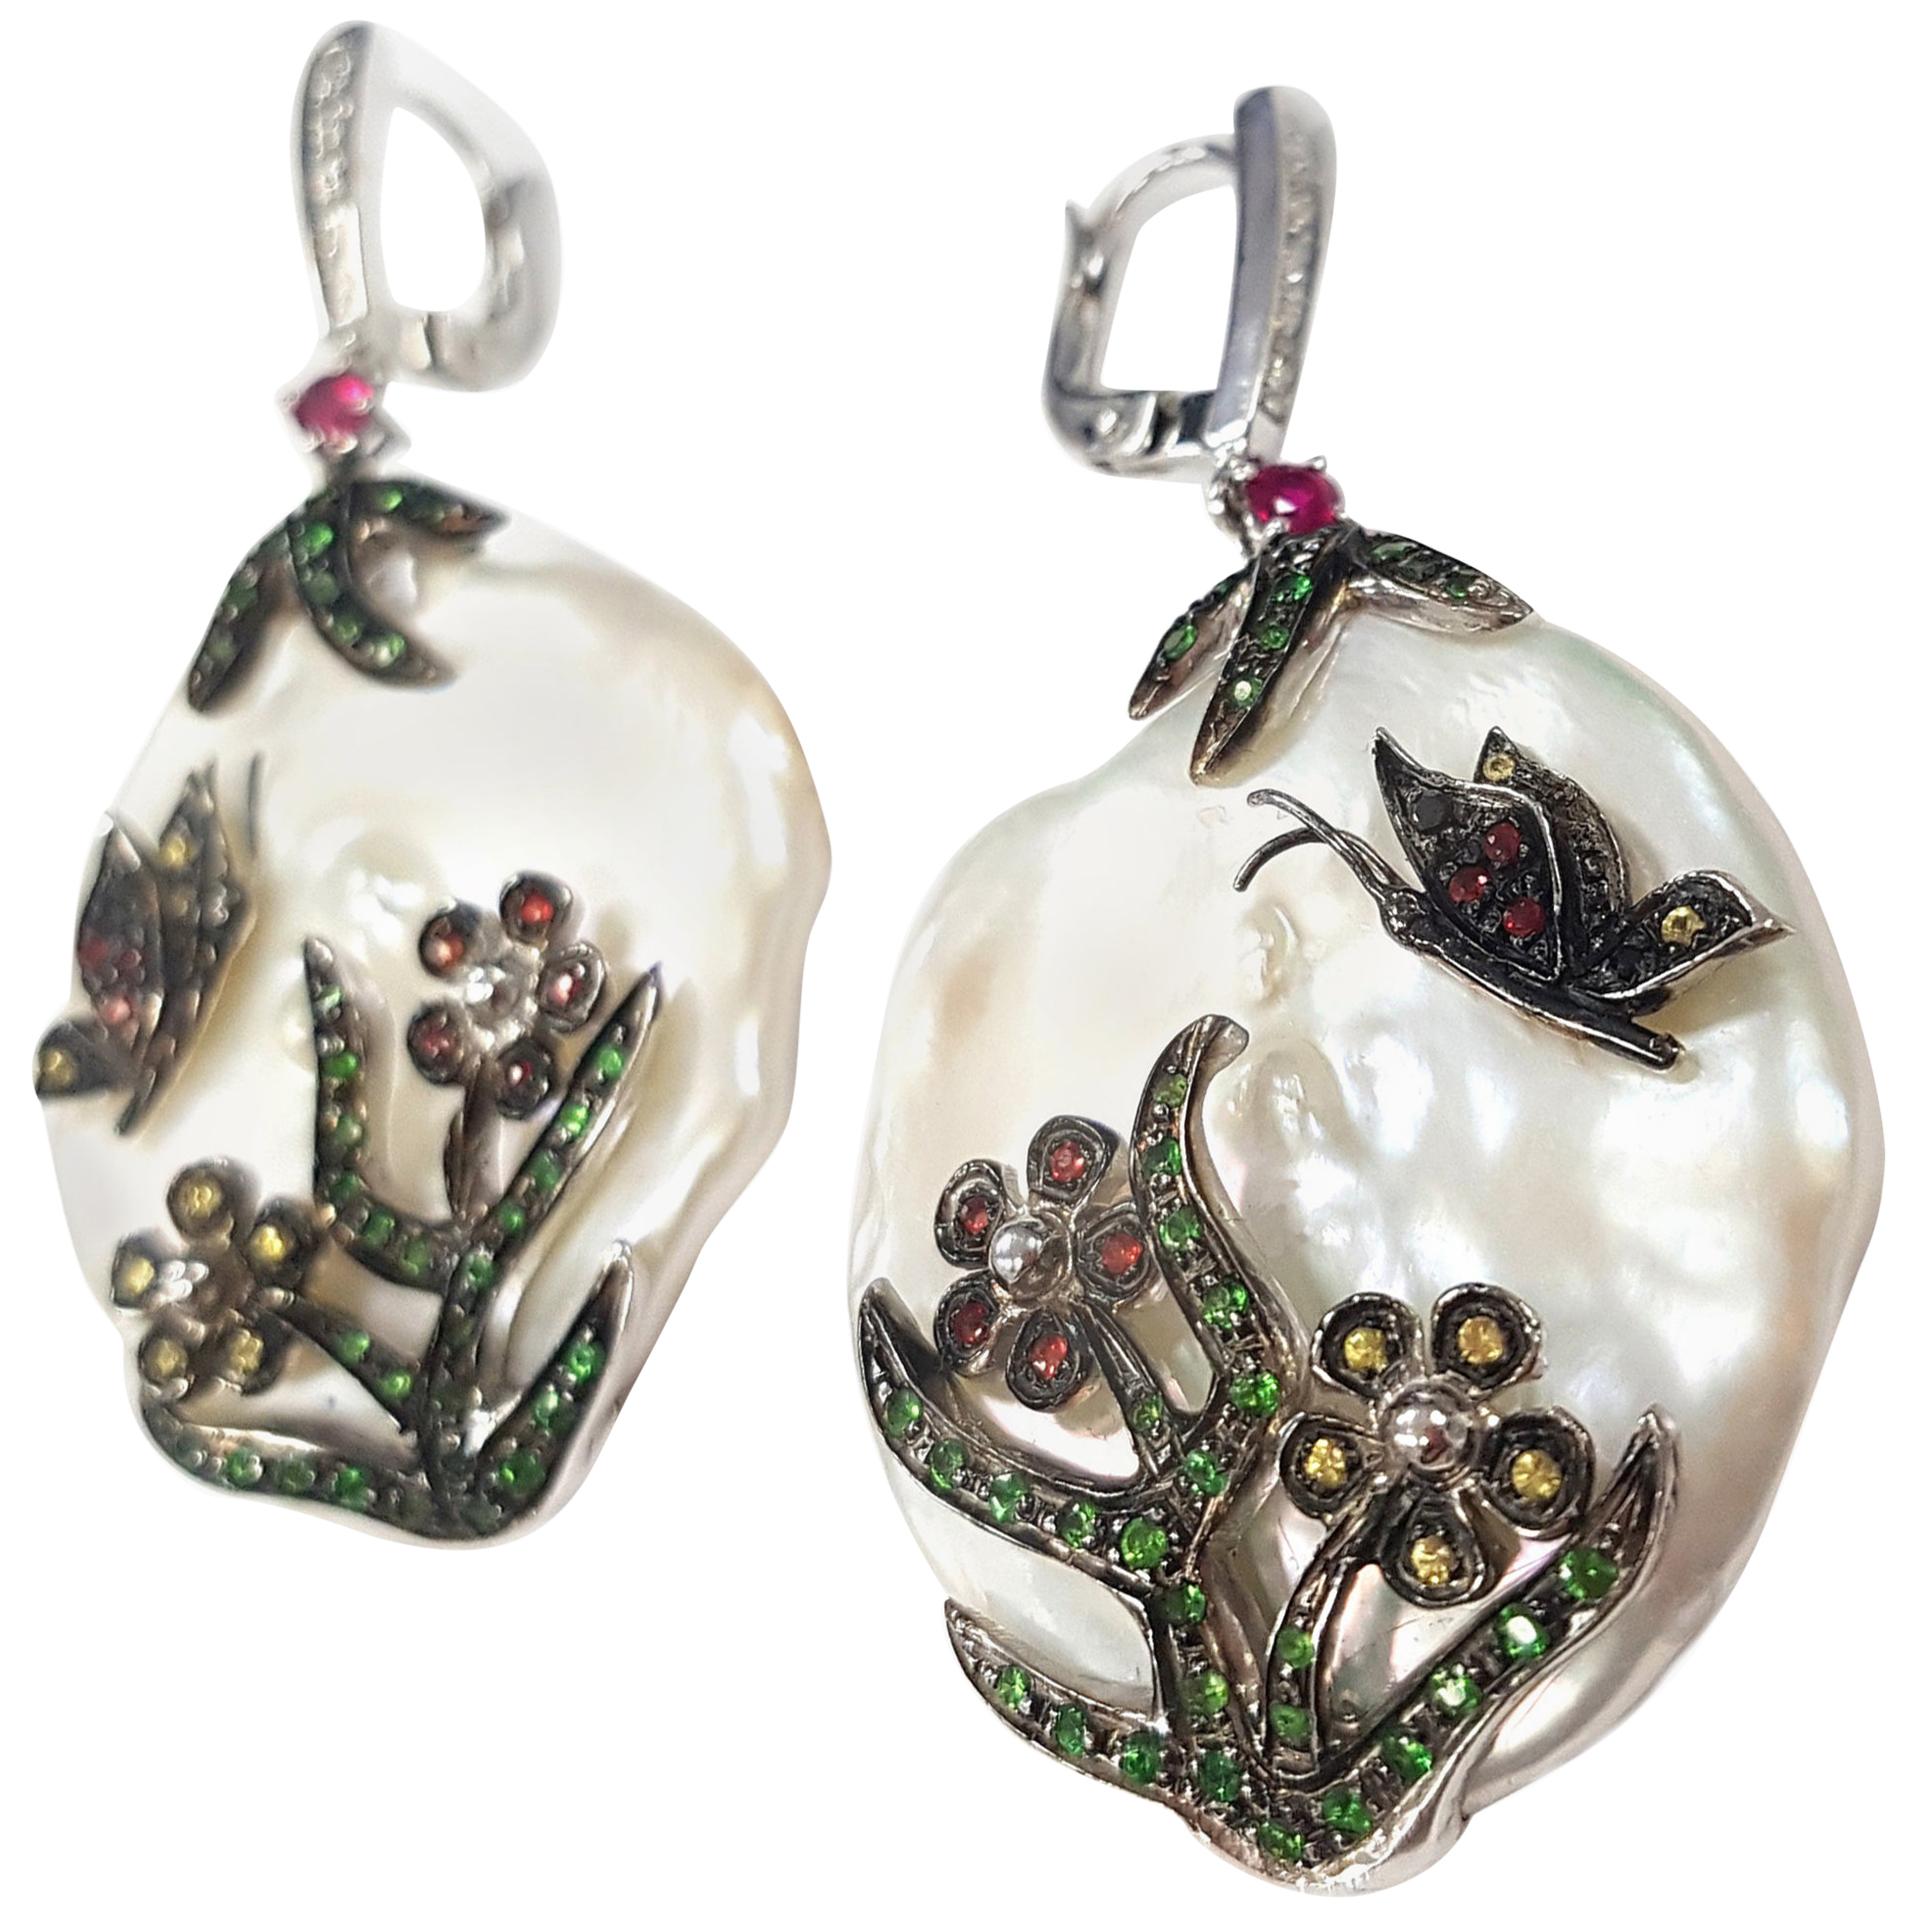 These lovely drop earrings make the perfect spring accessory. 

A charming pastoral story plays out on the surface of a large pearl as a butterfly flits around a cheerfully blooming flower and a tree, bright green with new leaves. Masterfully